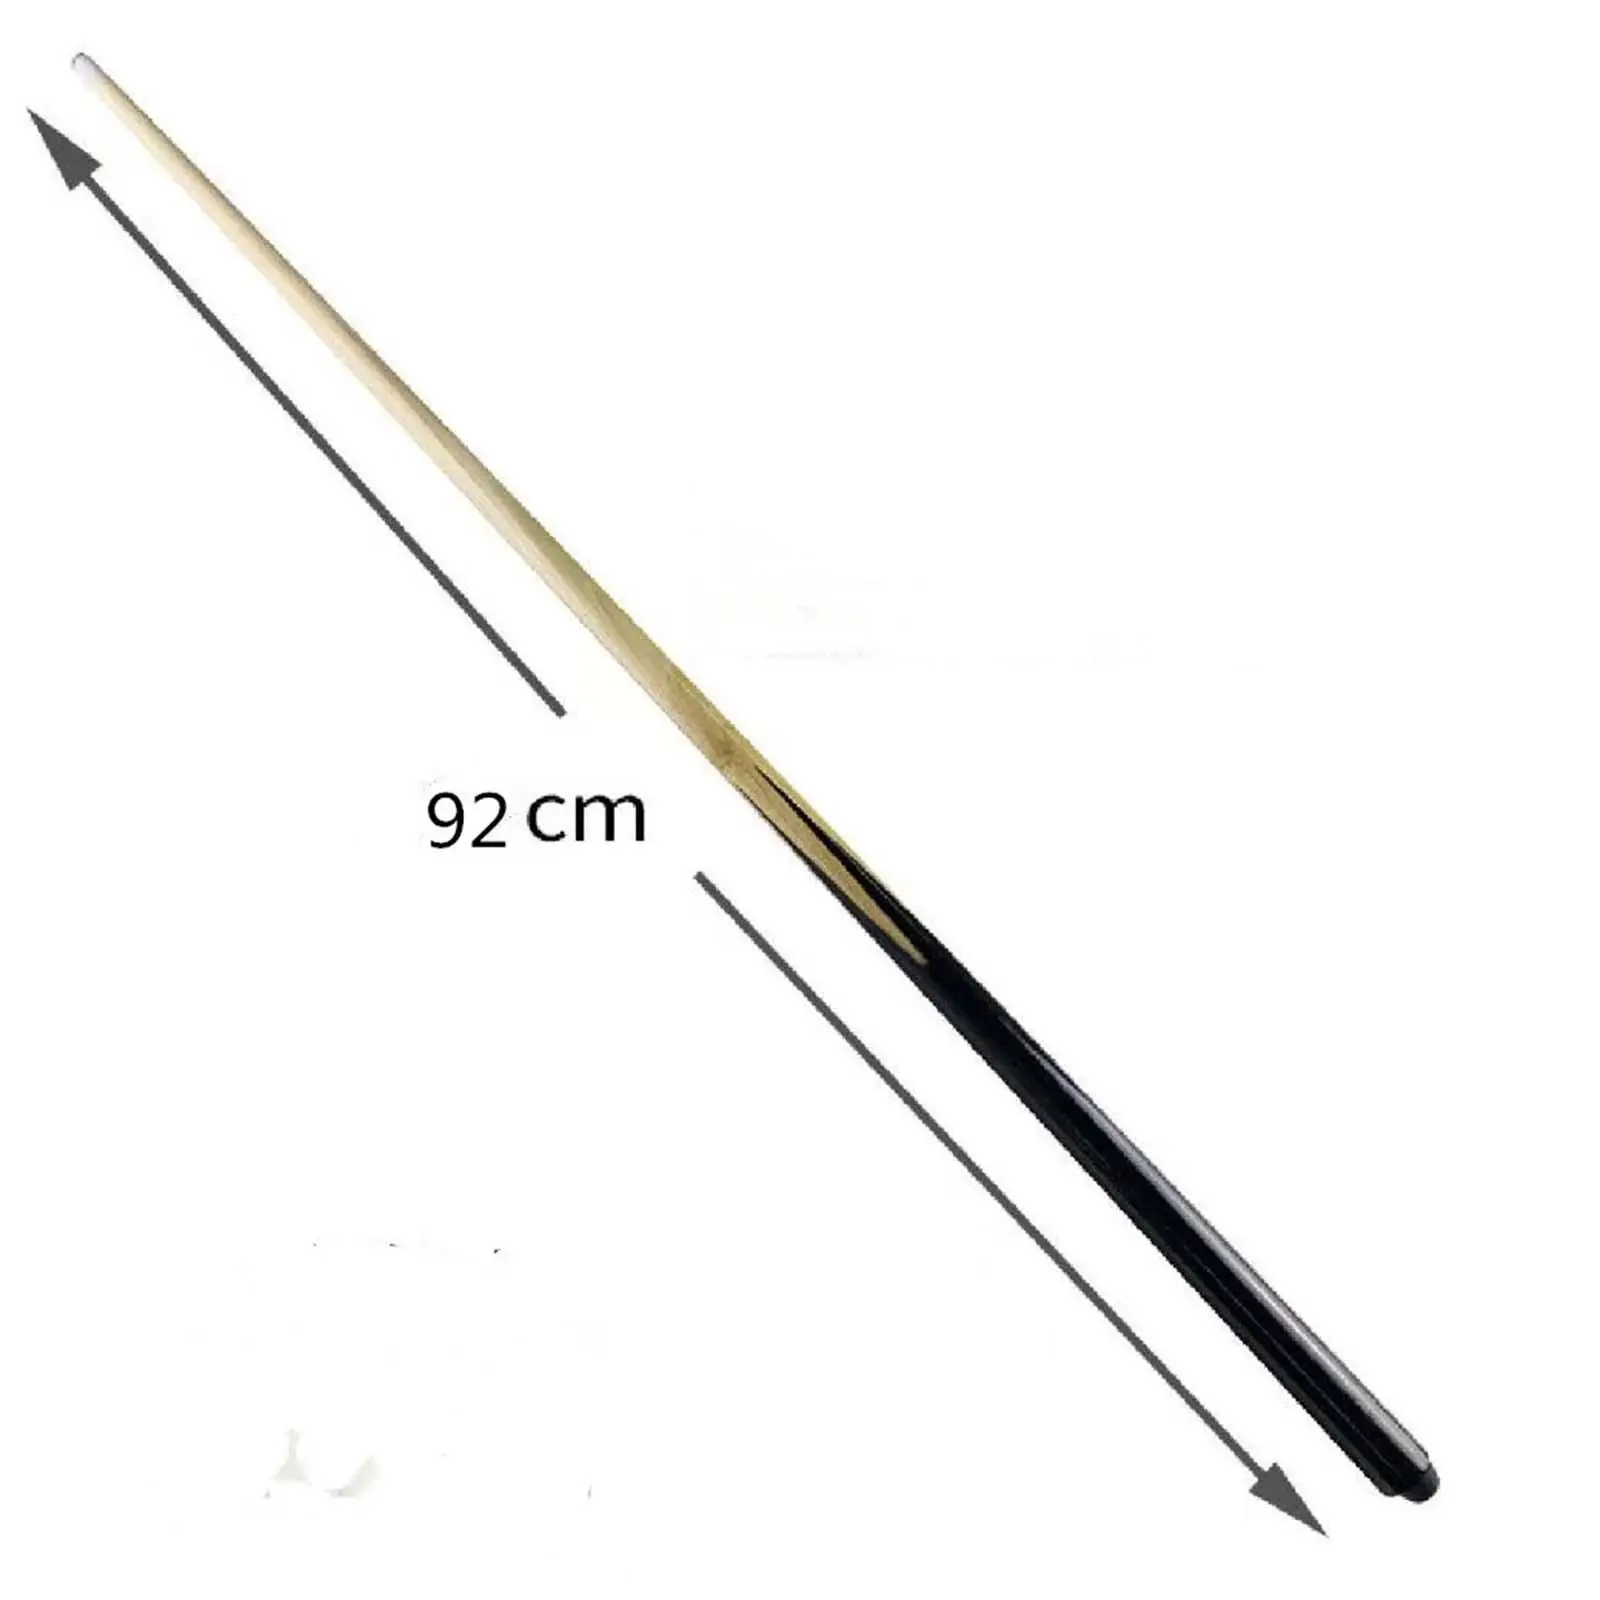 Small Pool Cue Wooden Children`s Practice Cue Billiard Tool Professional Kids Pool Stick Billiard Rod for Pool Table Home Girls